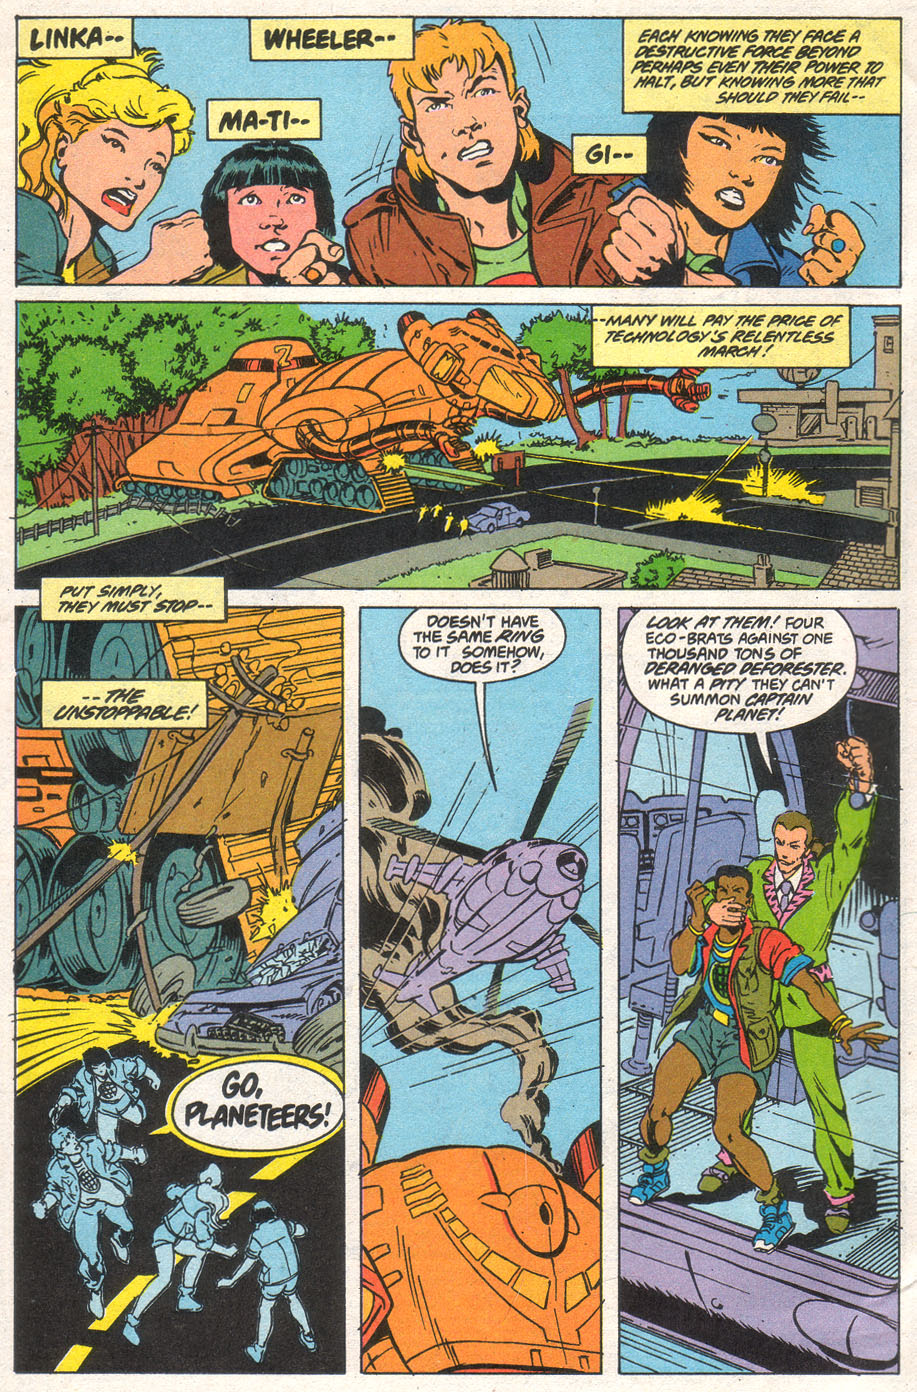 Captain Planet and the Planeteers 12 Page 3